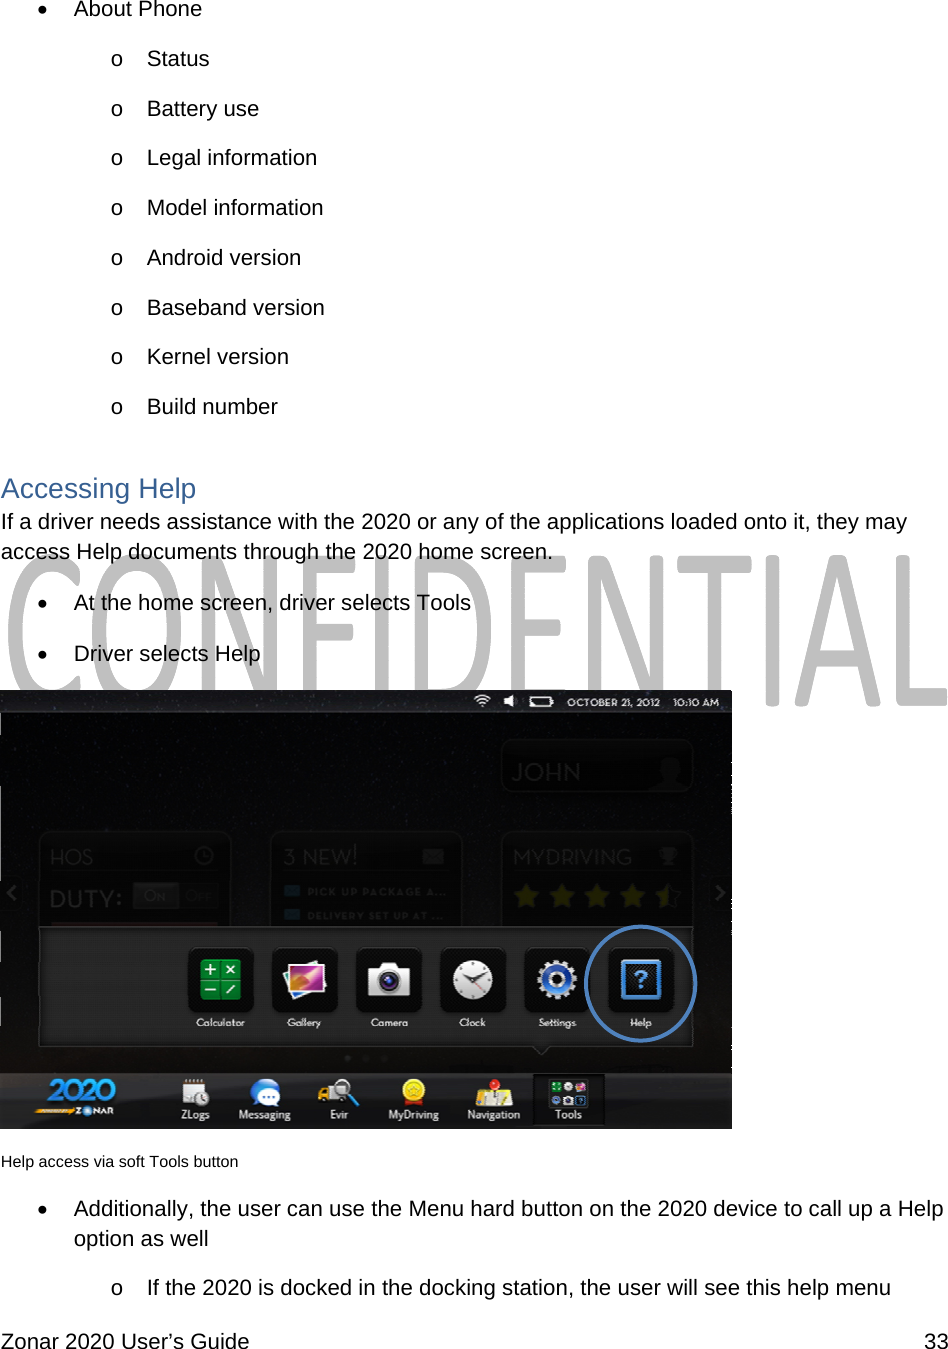  Zonar 2020 User’s Guide    33   About Phone o  Status o  Battery use o  Legal information o  Model information o  Android version o  Baseband version o  Kernel version o  Build number Accessing Help If a driver needs assistance with the 2020 or any of the applications loaded onto it, they may access Help documents through the 2020 home screen.  At the home screen, driver selects Tools  Driver selects Help  Help access via soft Tools button  Additionally, the user can use the Menu hard button on the 2020 device to call up a Help option as well o  If the 2020 is docked in the docking station, the user will see this help menu 